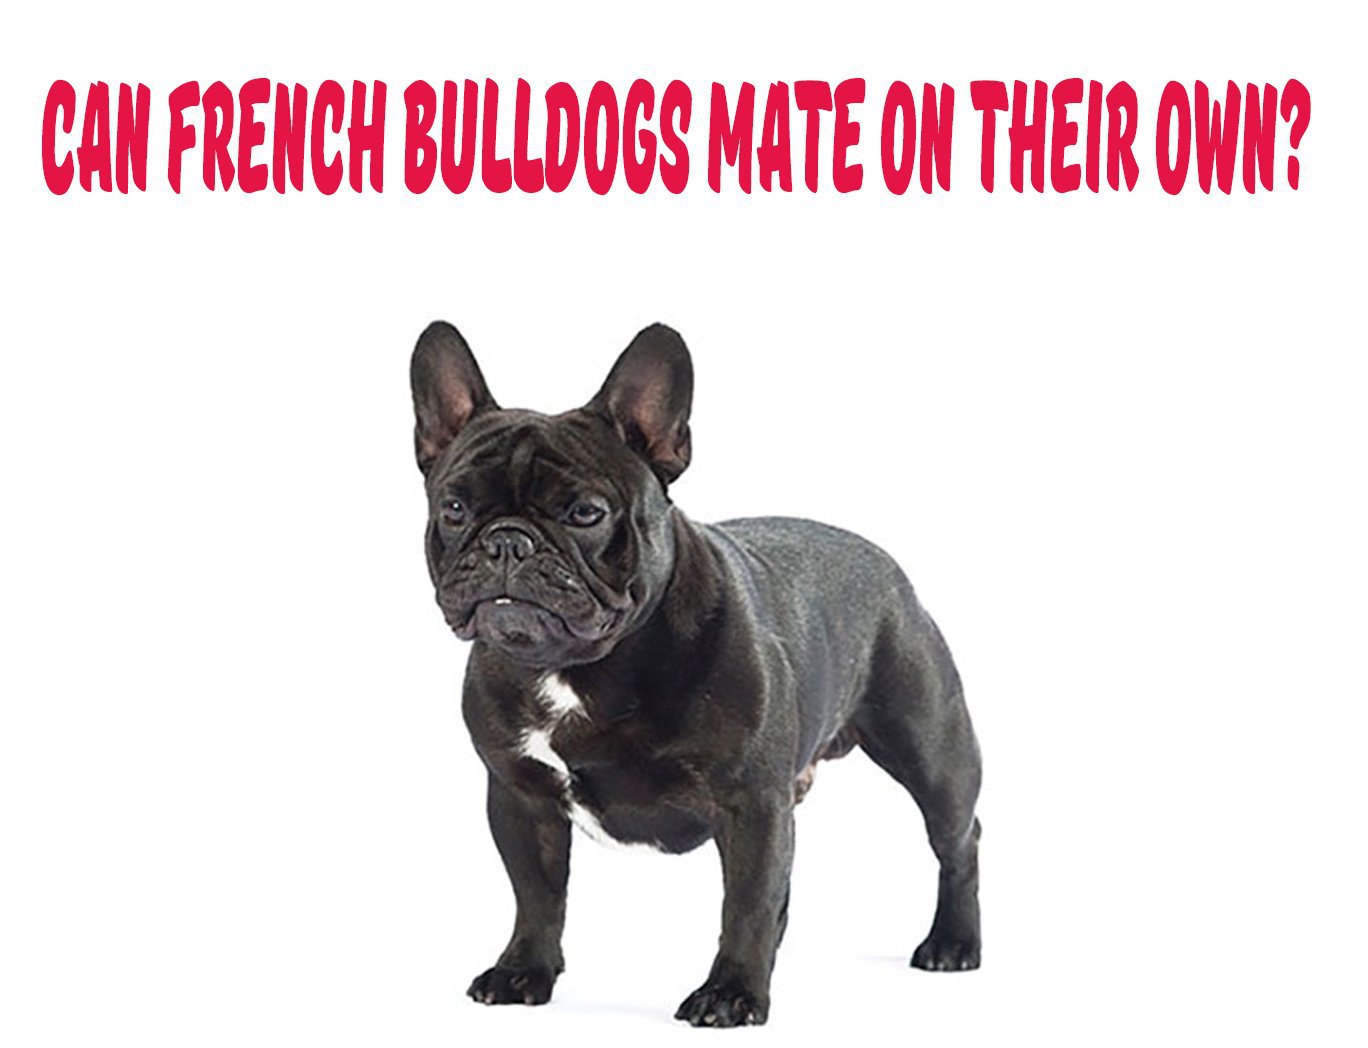 why french bulldogs can't breed?